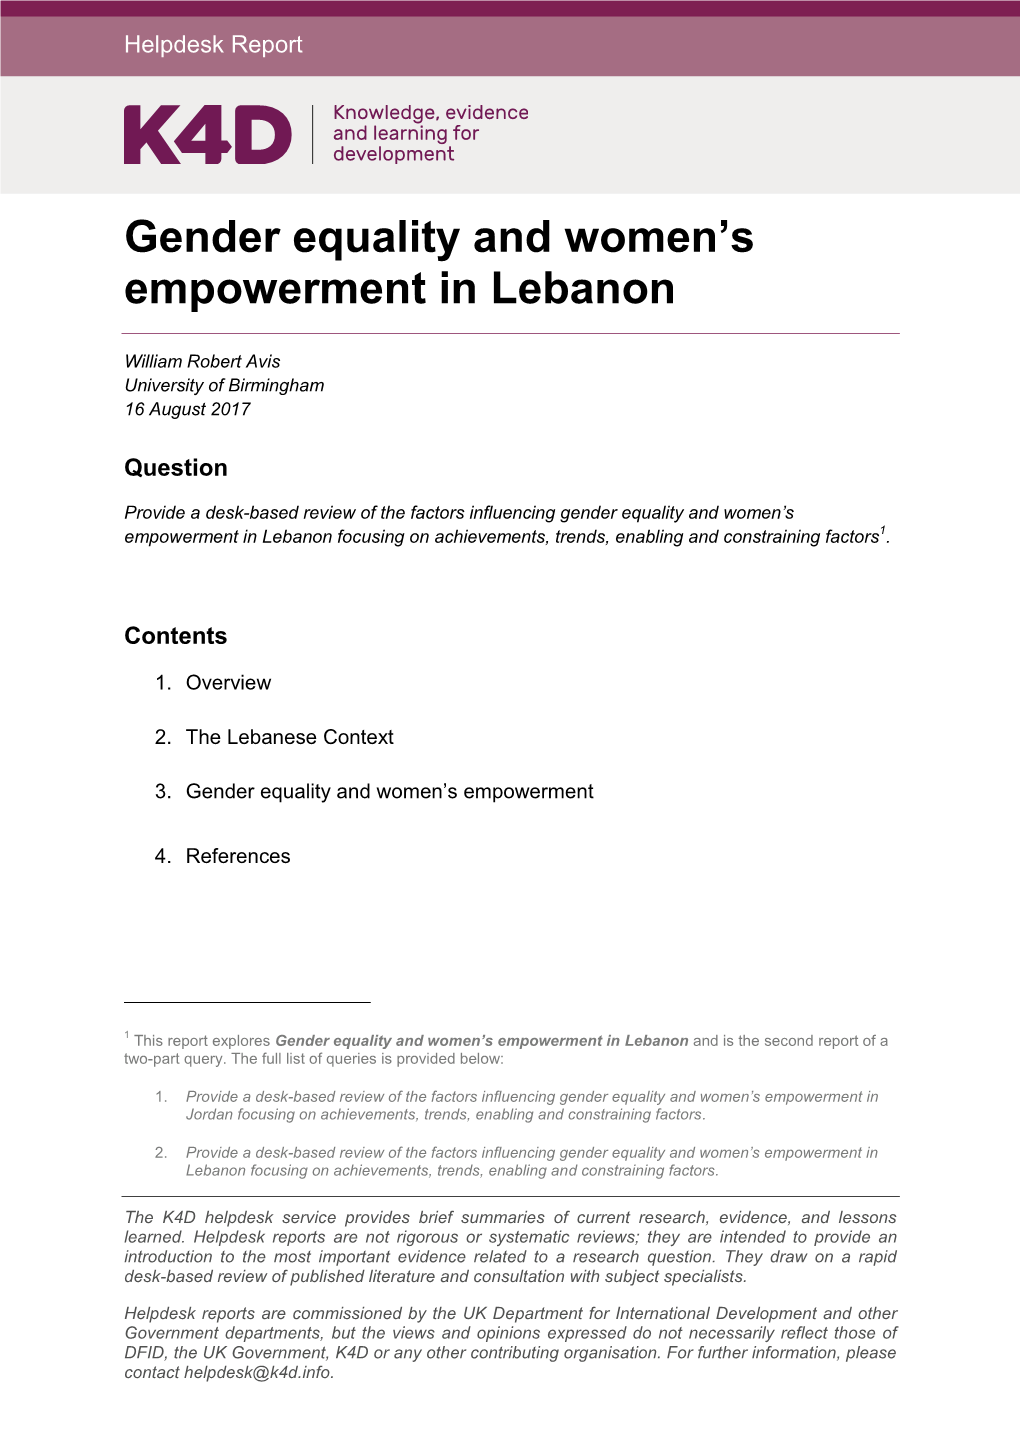 Gender Equality and Women's Empowerment in Lebanon